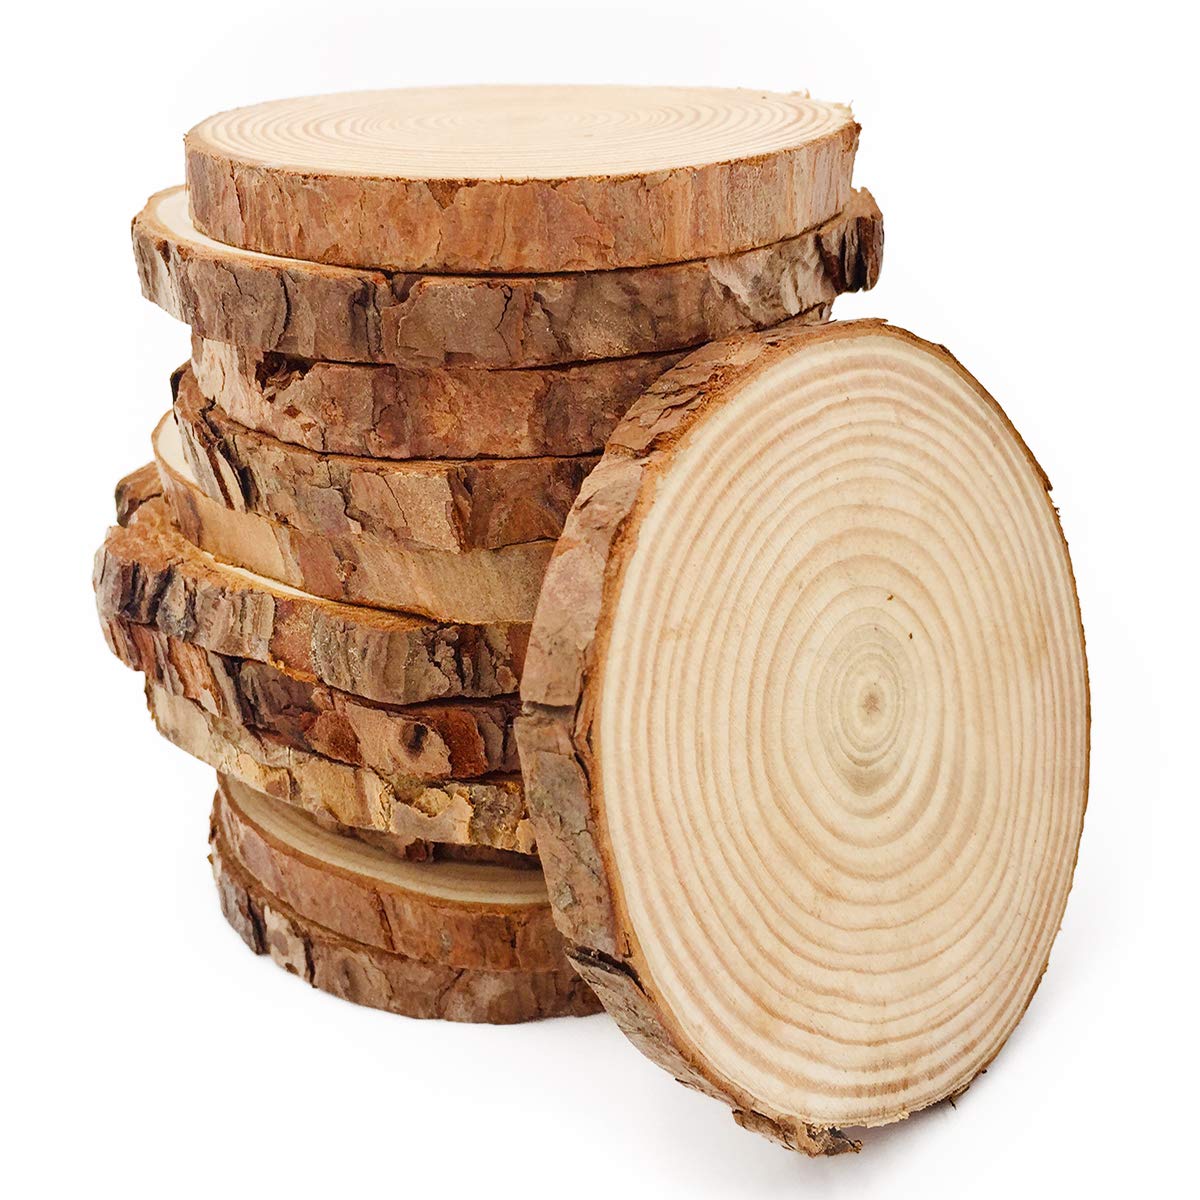 20 Wood Slices 6 8 Cm Rustic Wood Rounds 3 Inch Wood Slices Wood